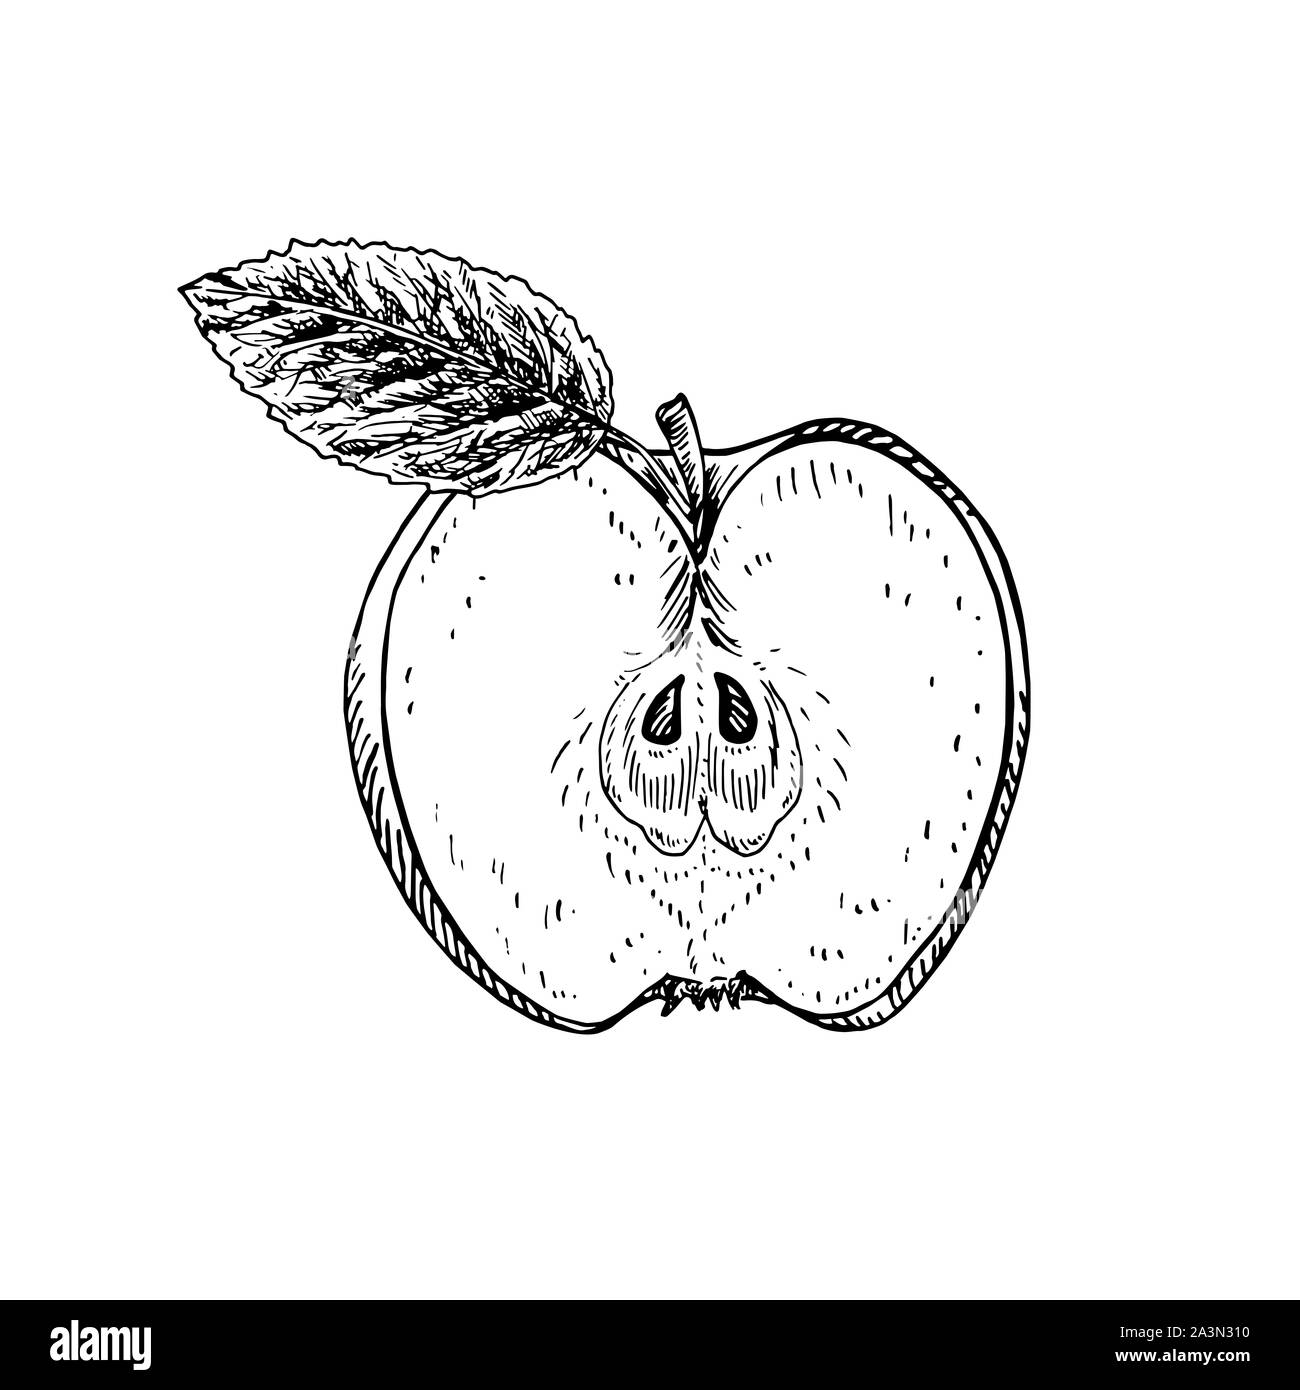 Apple with leaf cut half, hand drawn gravure style, sketch illustration, element for design Stock Photo